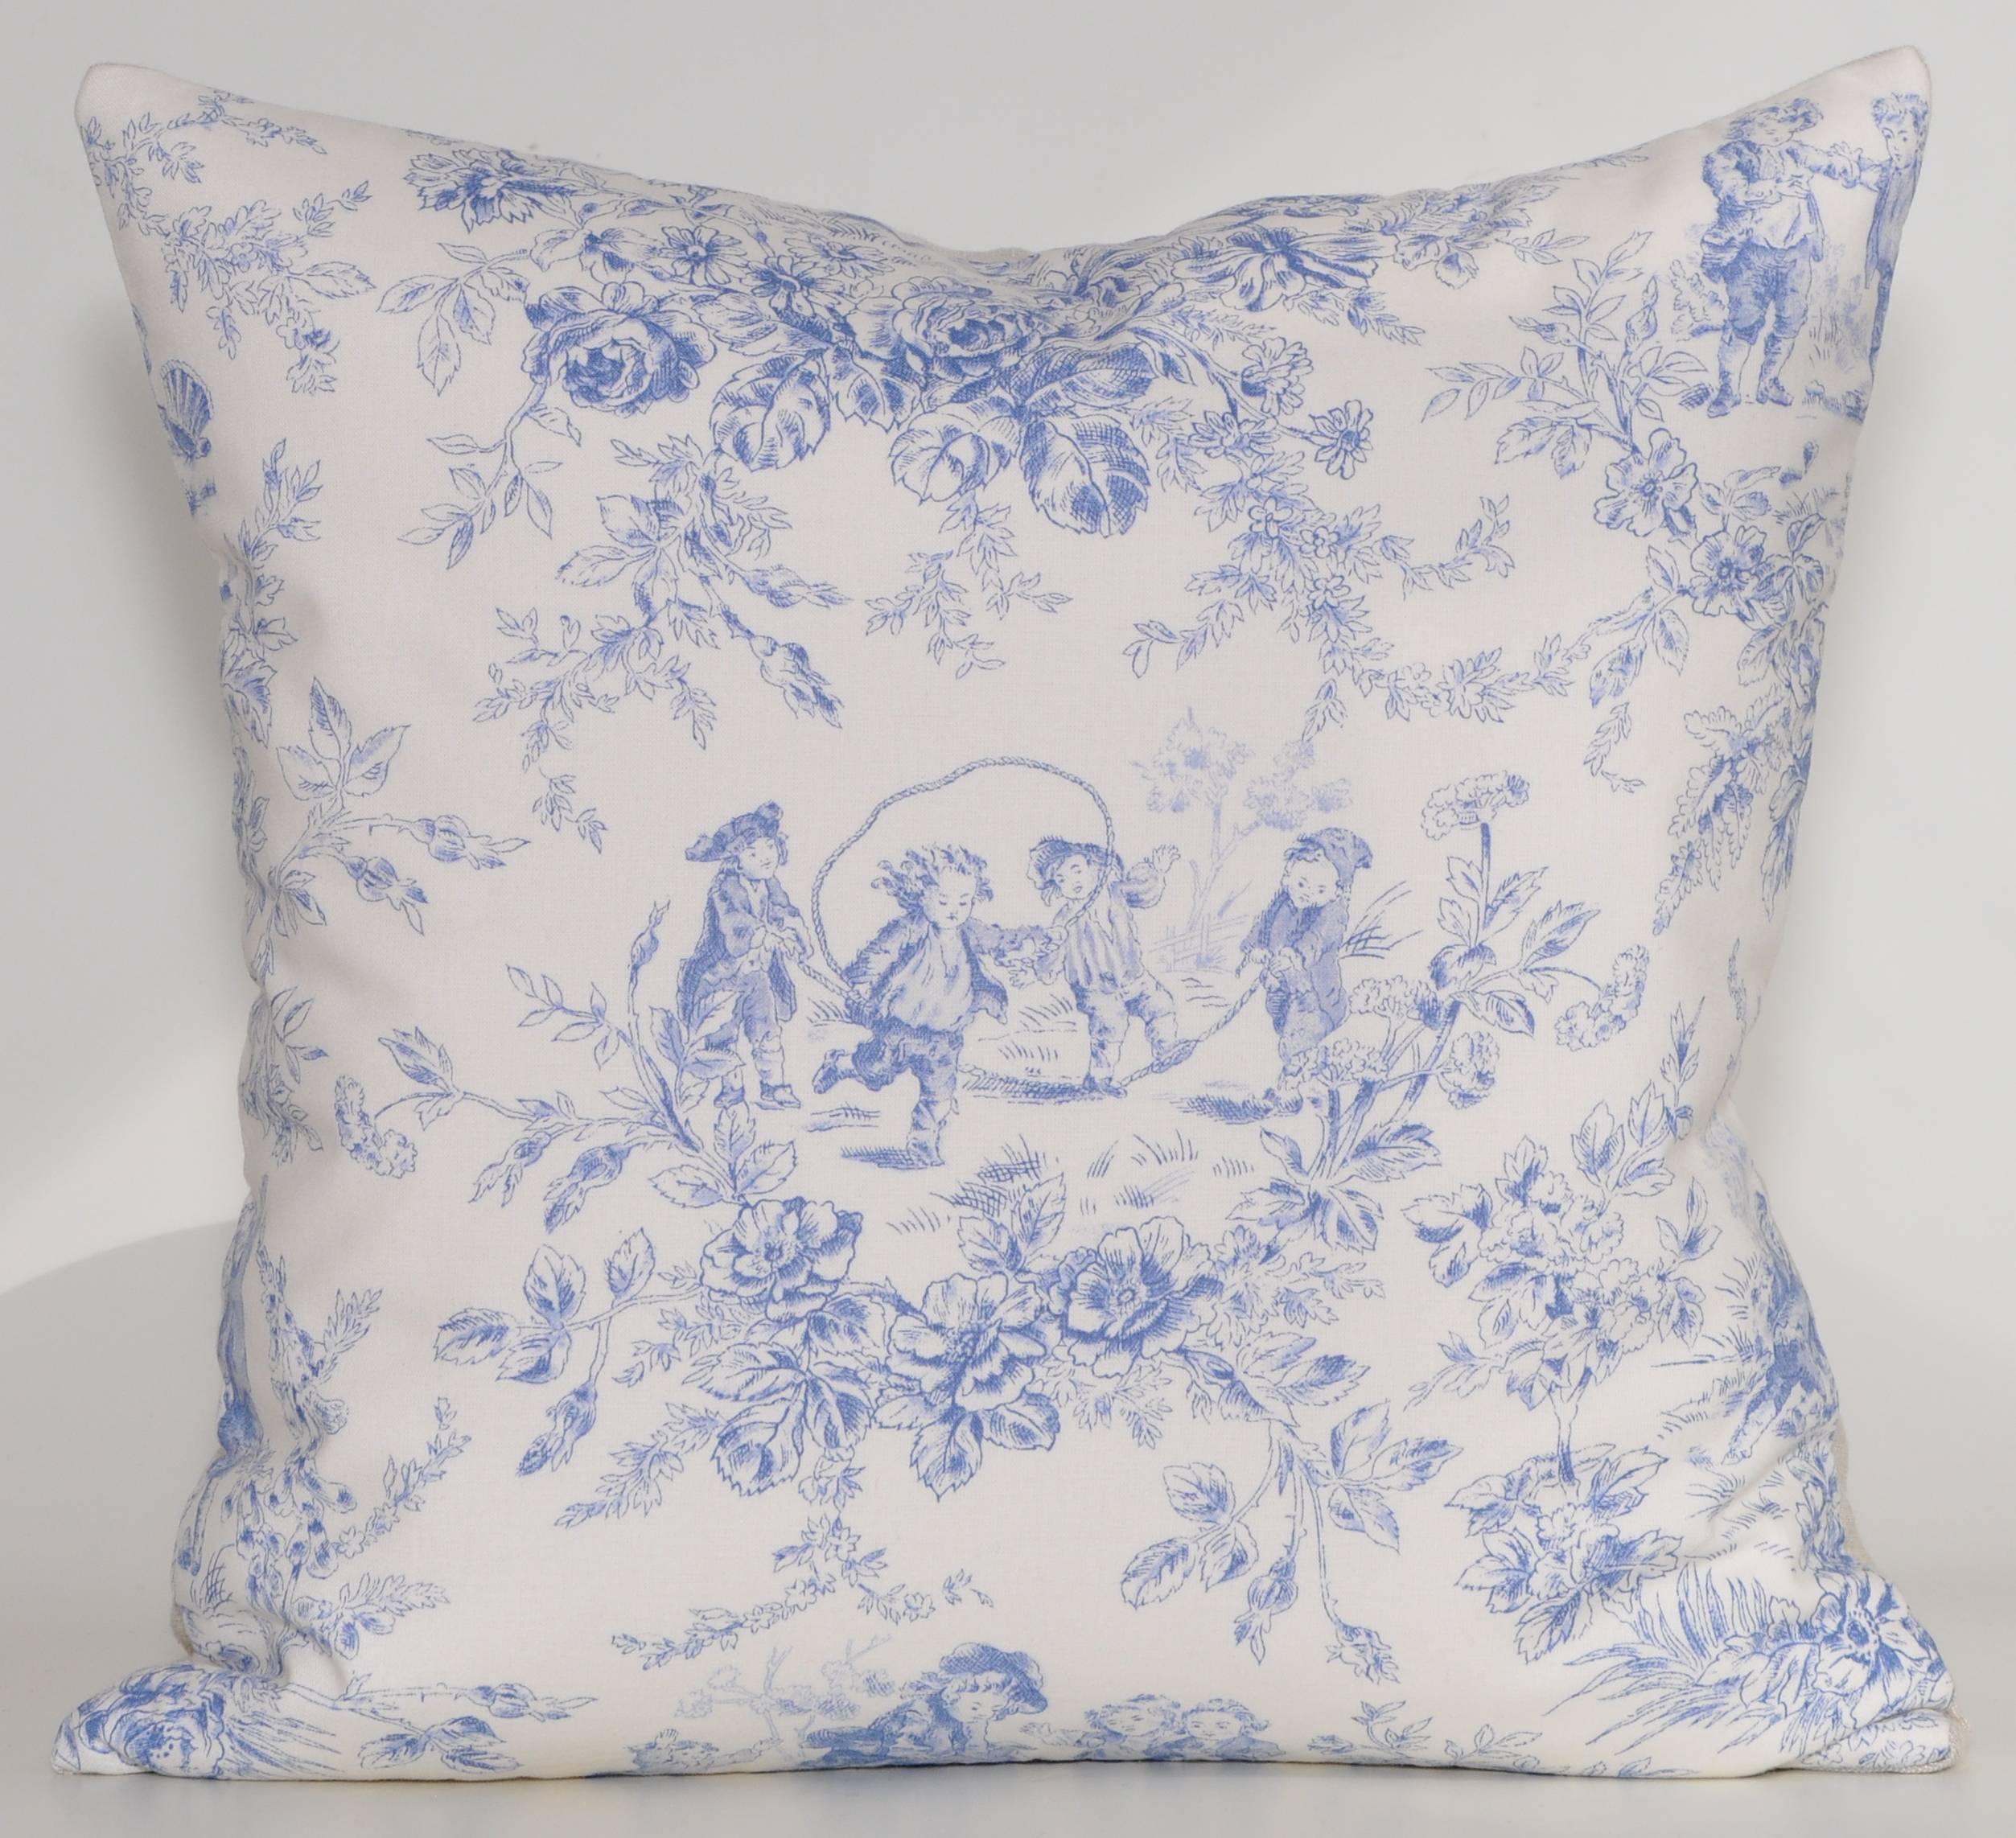 Custom-made one-of-a-kind luxury pair of cushions (pillows) set created from vintage fabric of an antique 'Toile de Jouy' design in delicate cotton. Purchased at ‘Marché Paul Bert’ in France, from an unused roll and marked along the entirety of it’s